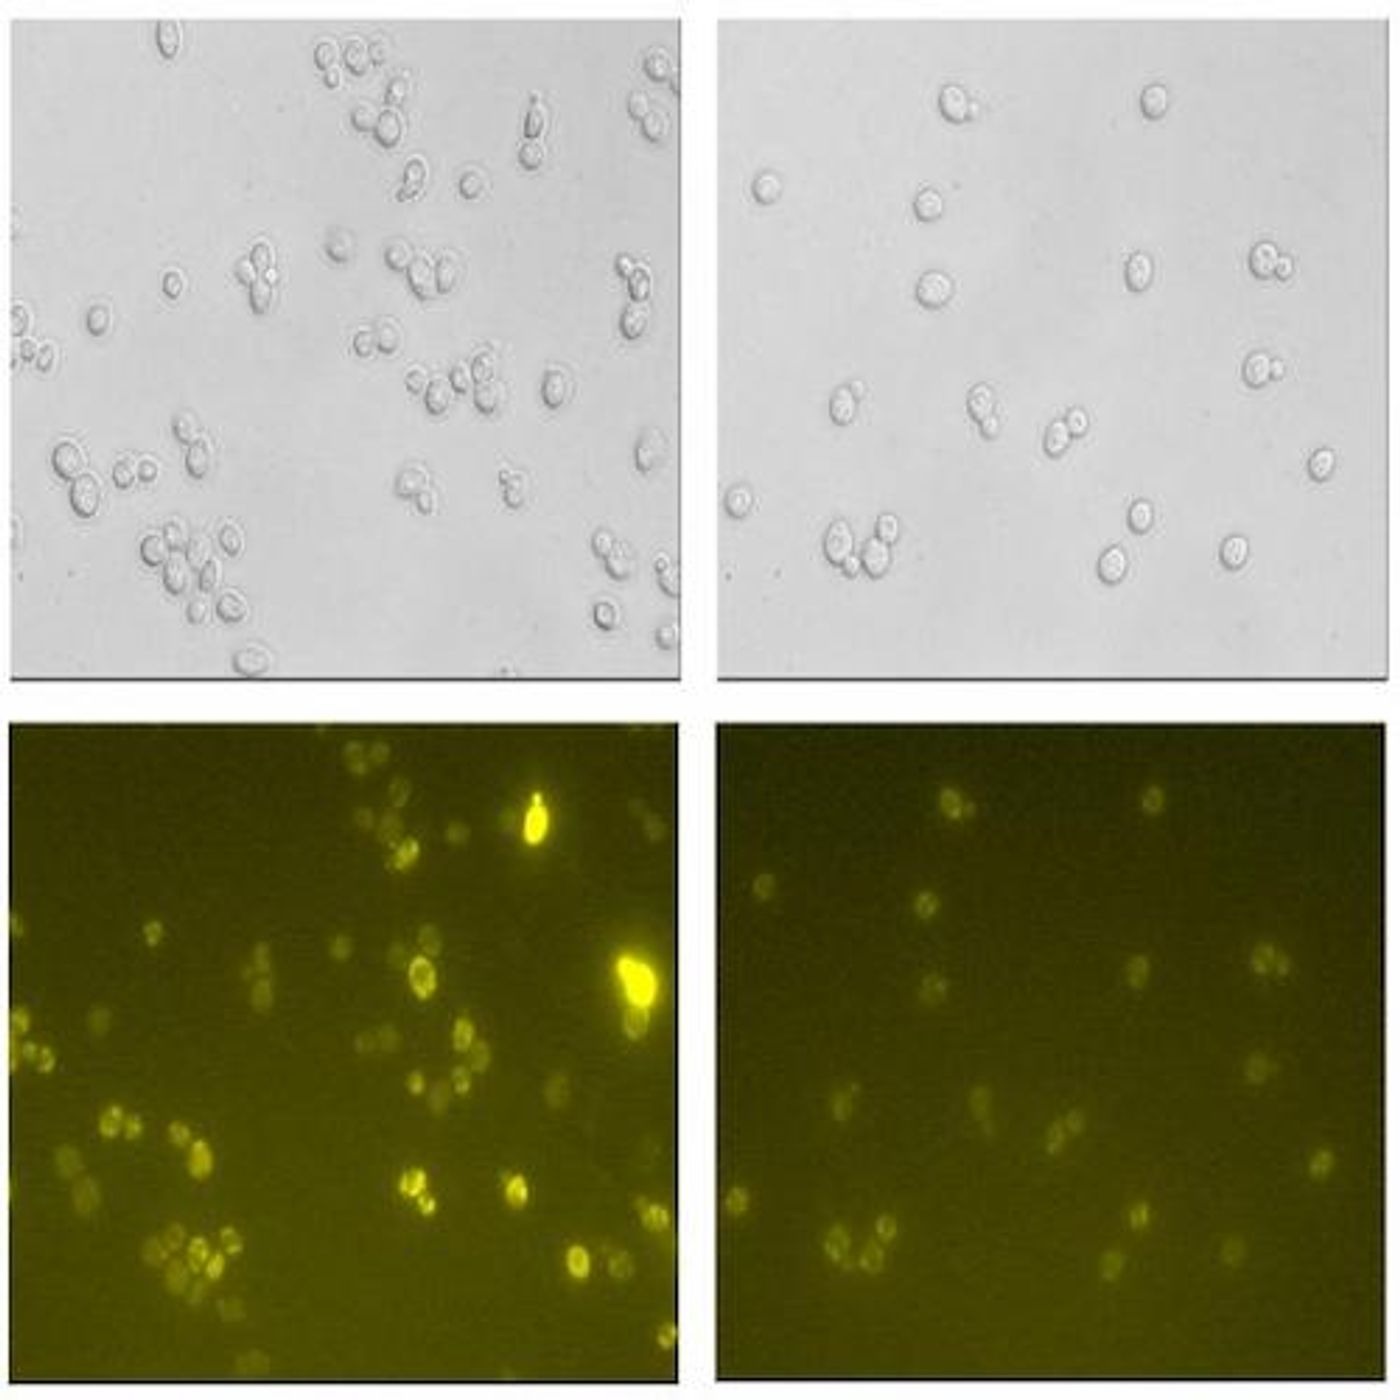 In regular yeast (the left-hand images), the secretion of proteins is hampered by harmful reactive oxygen species (ROS) generated by the yeast. The lower image shows these as fluorescent areas, which indicate cell damage. In the modified yeast (right) protein production is improved. / Credit: Mingtao Huang/Chalmers